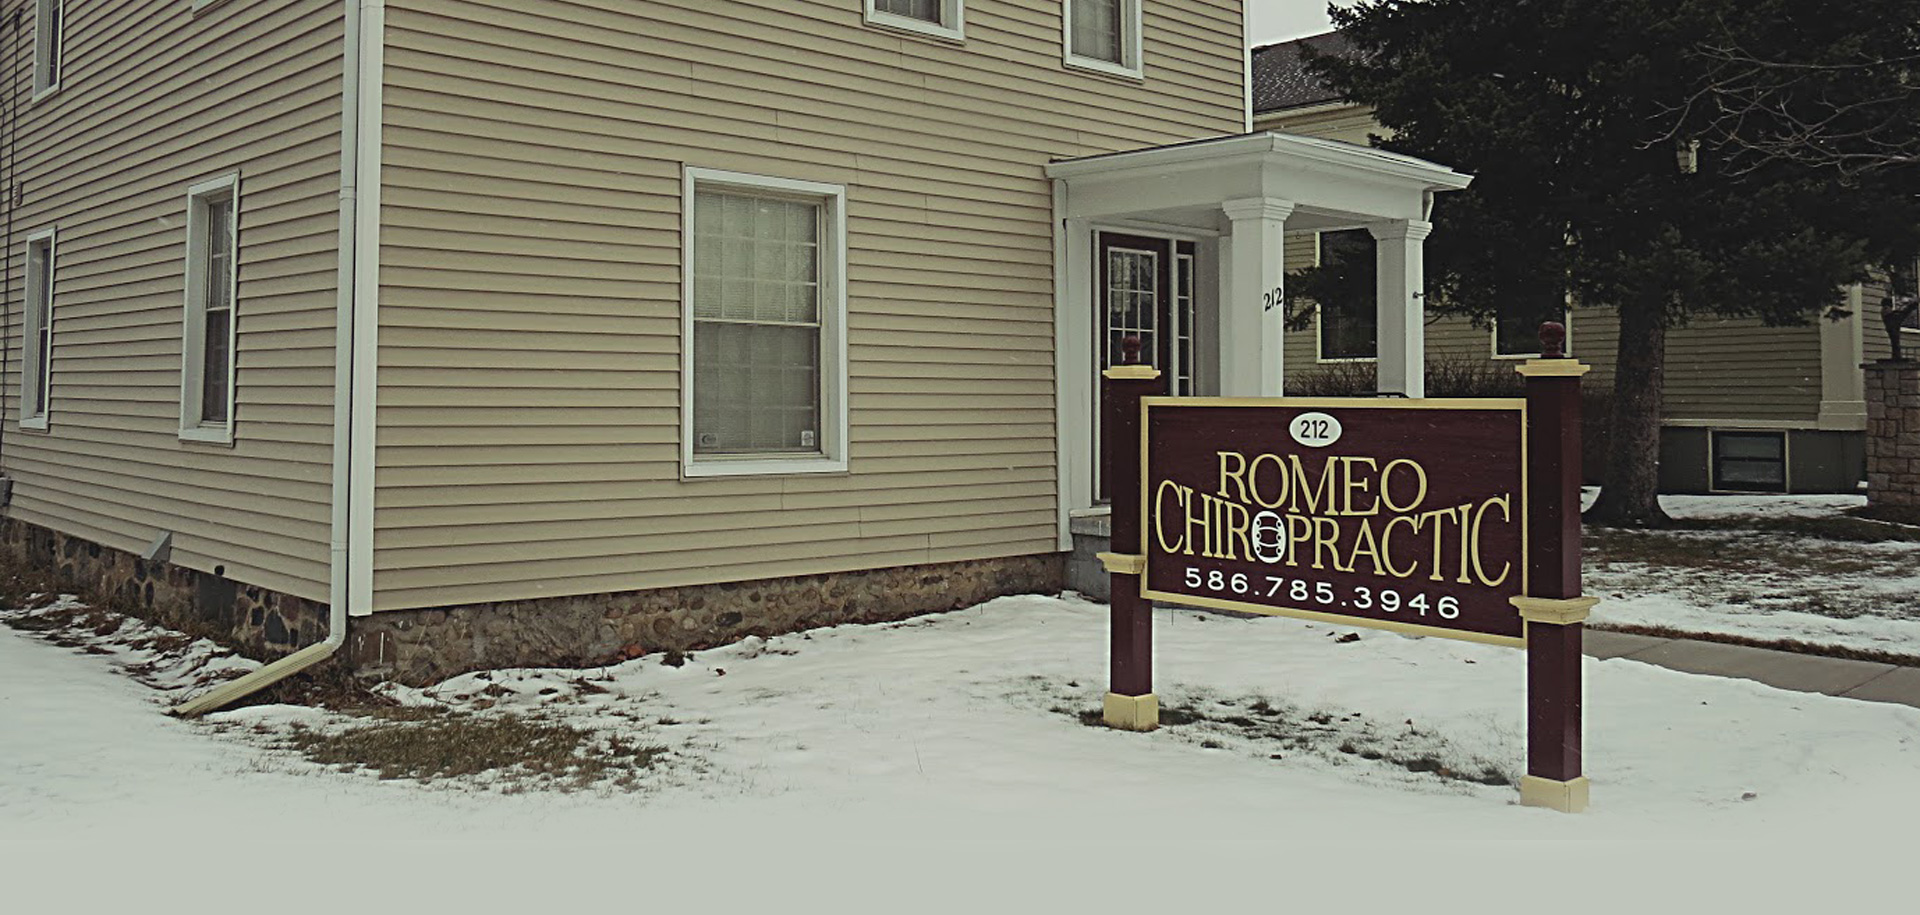 Welcome to Romeo Chiropractic